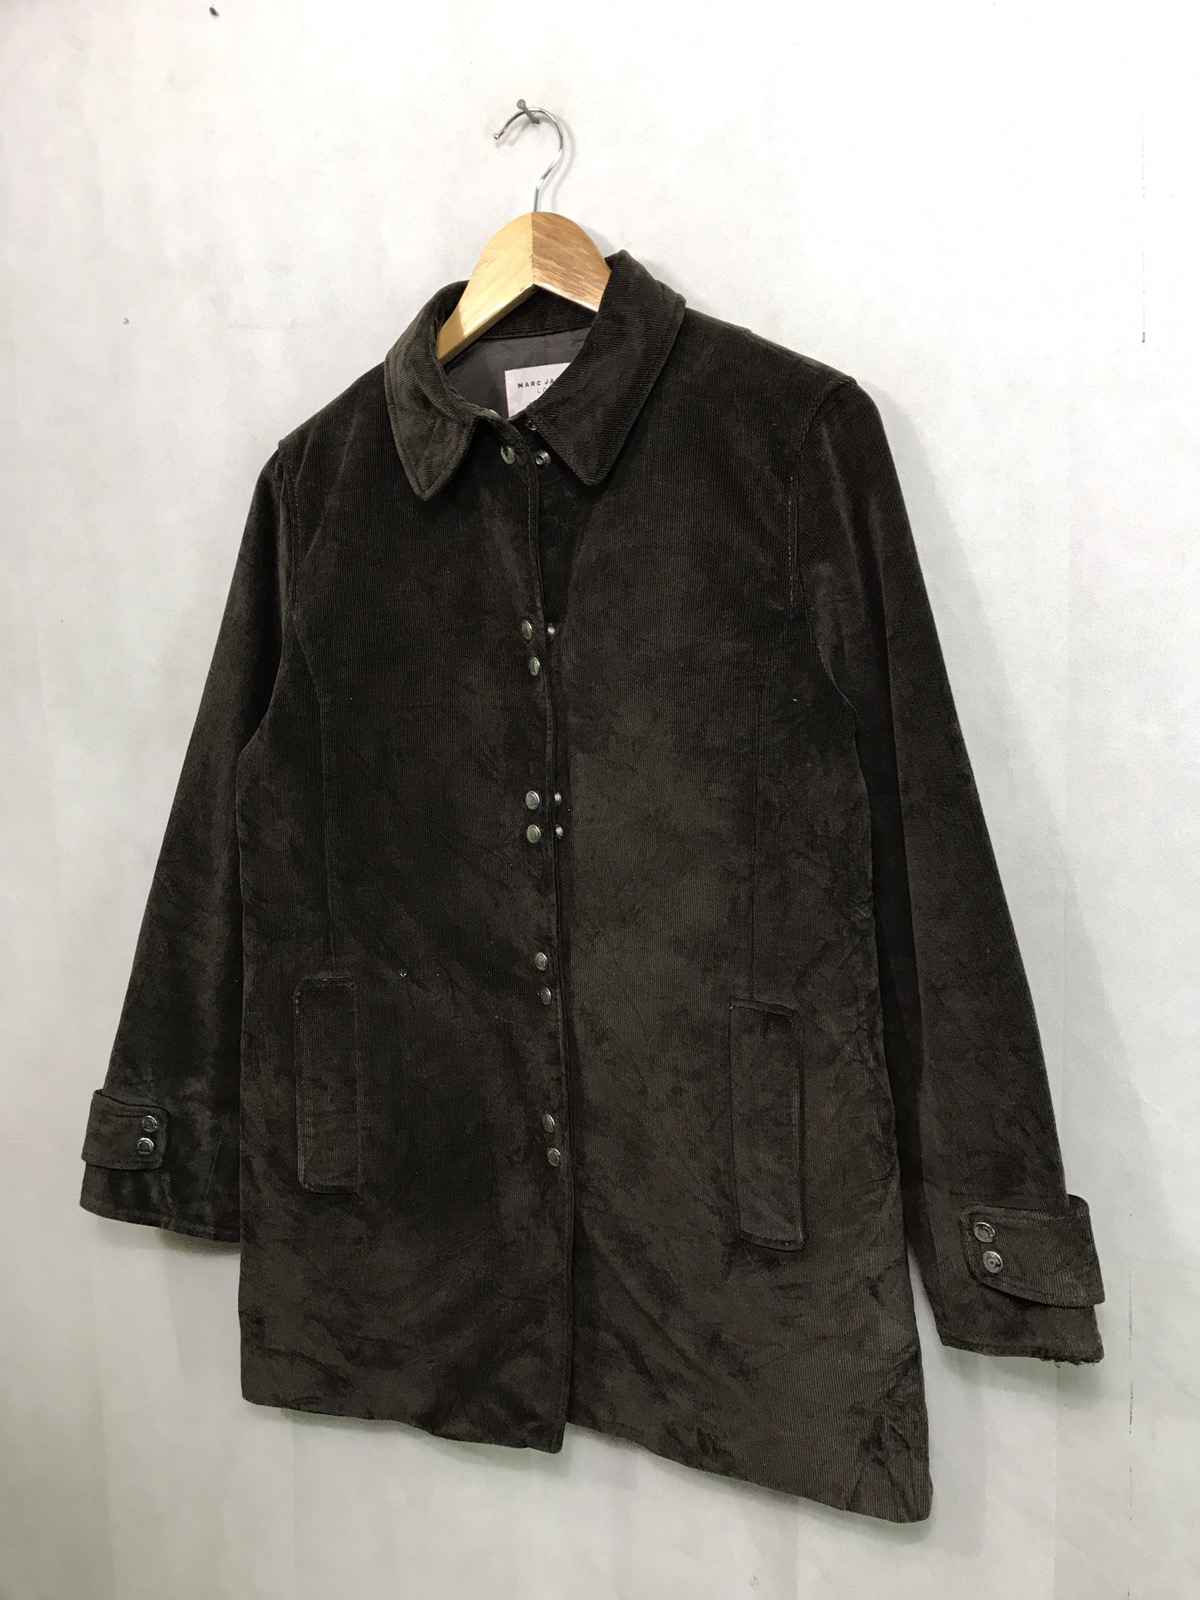 MARC JACOBS LOOK CORDUROY SNAP BUTTON JACKET for ladies - 4